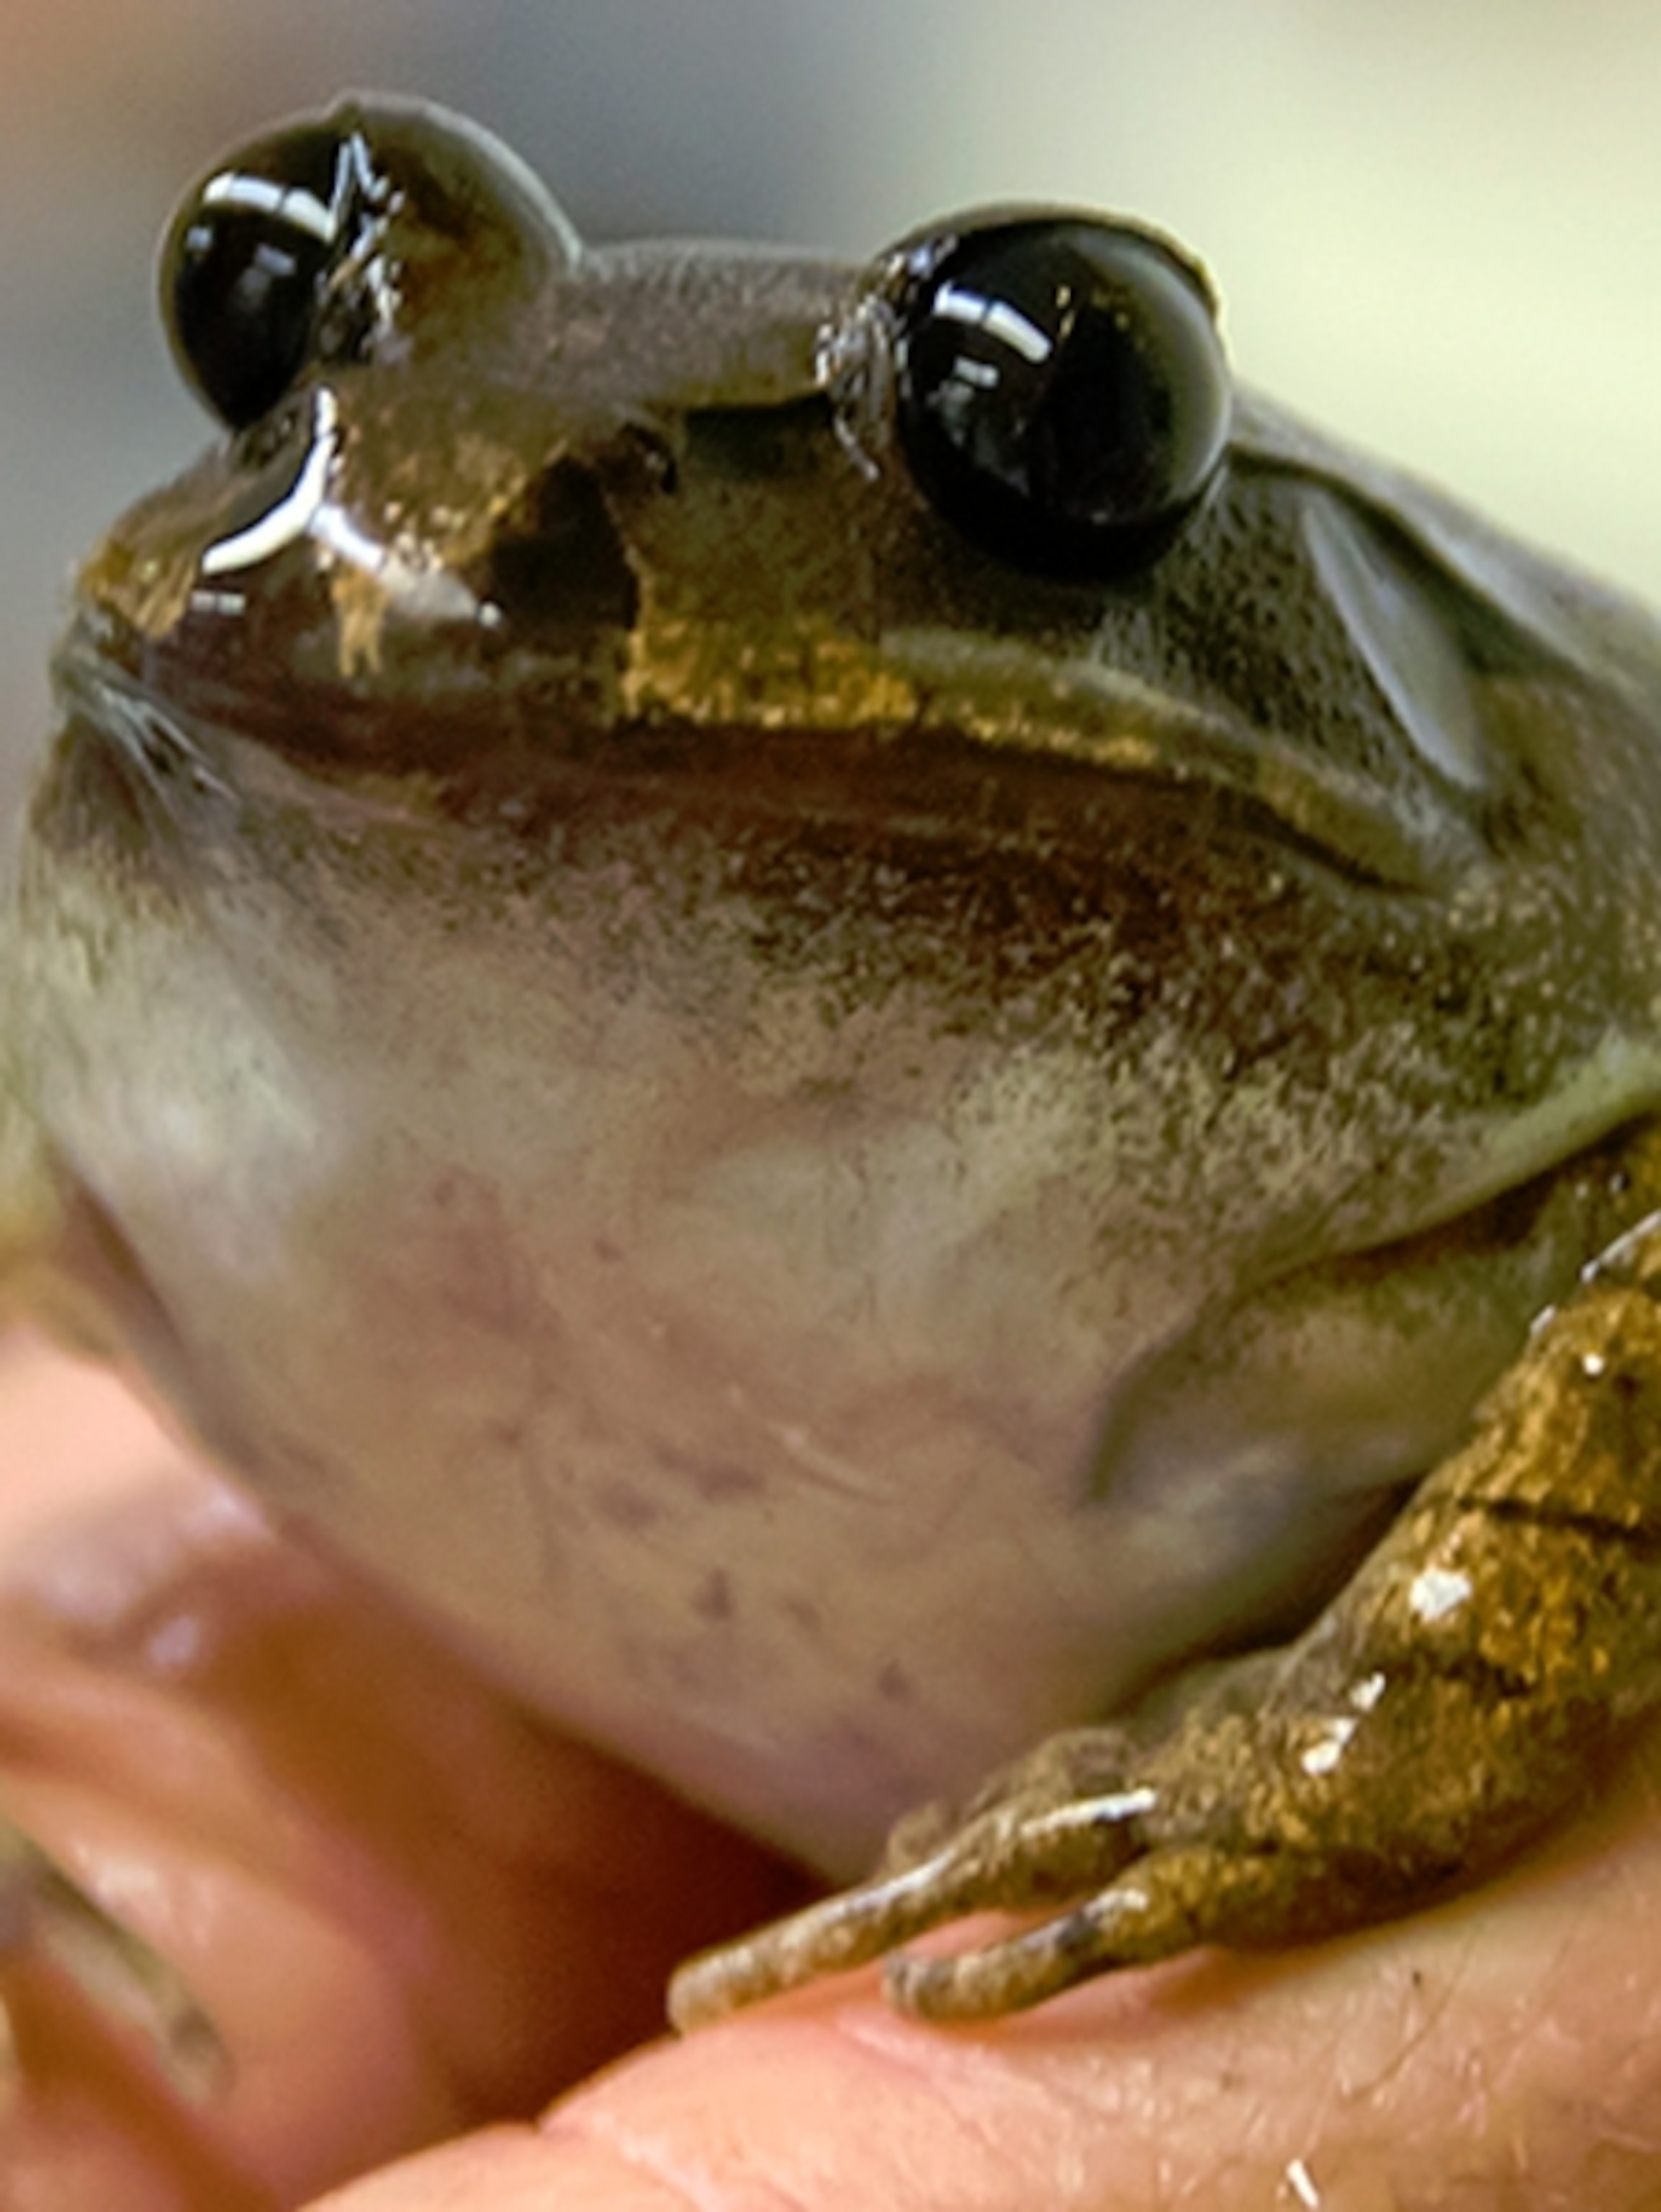 When did the gastric-brooding frog become extinct?